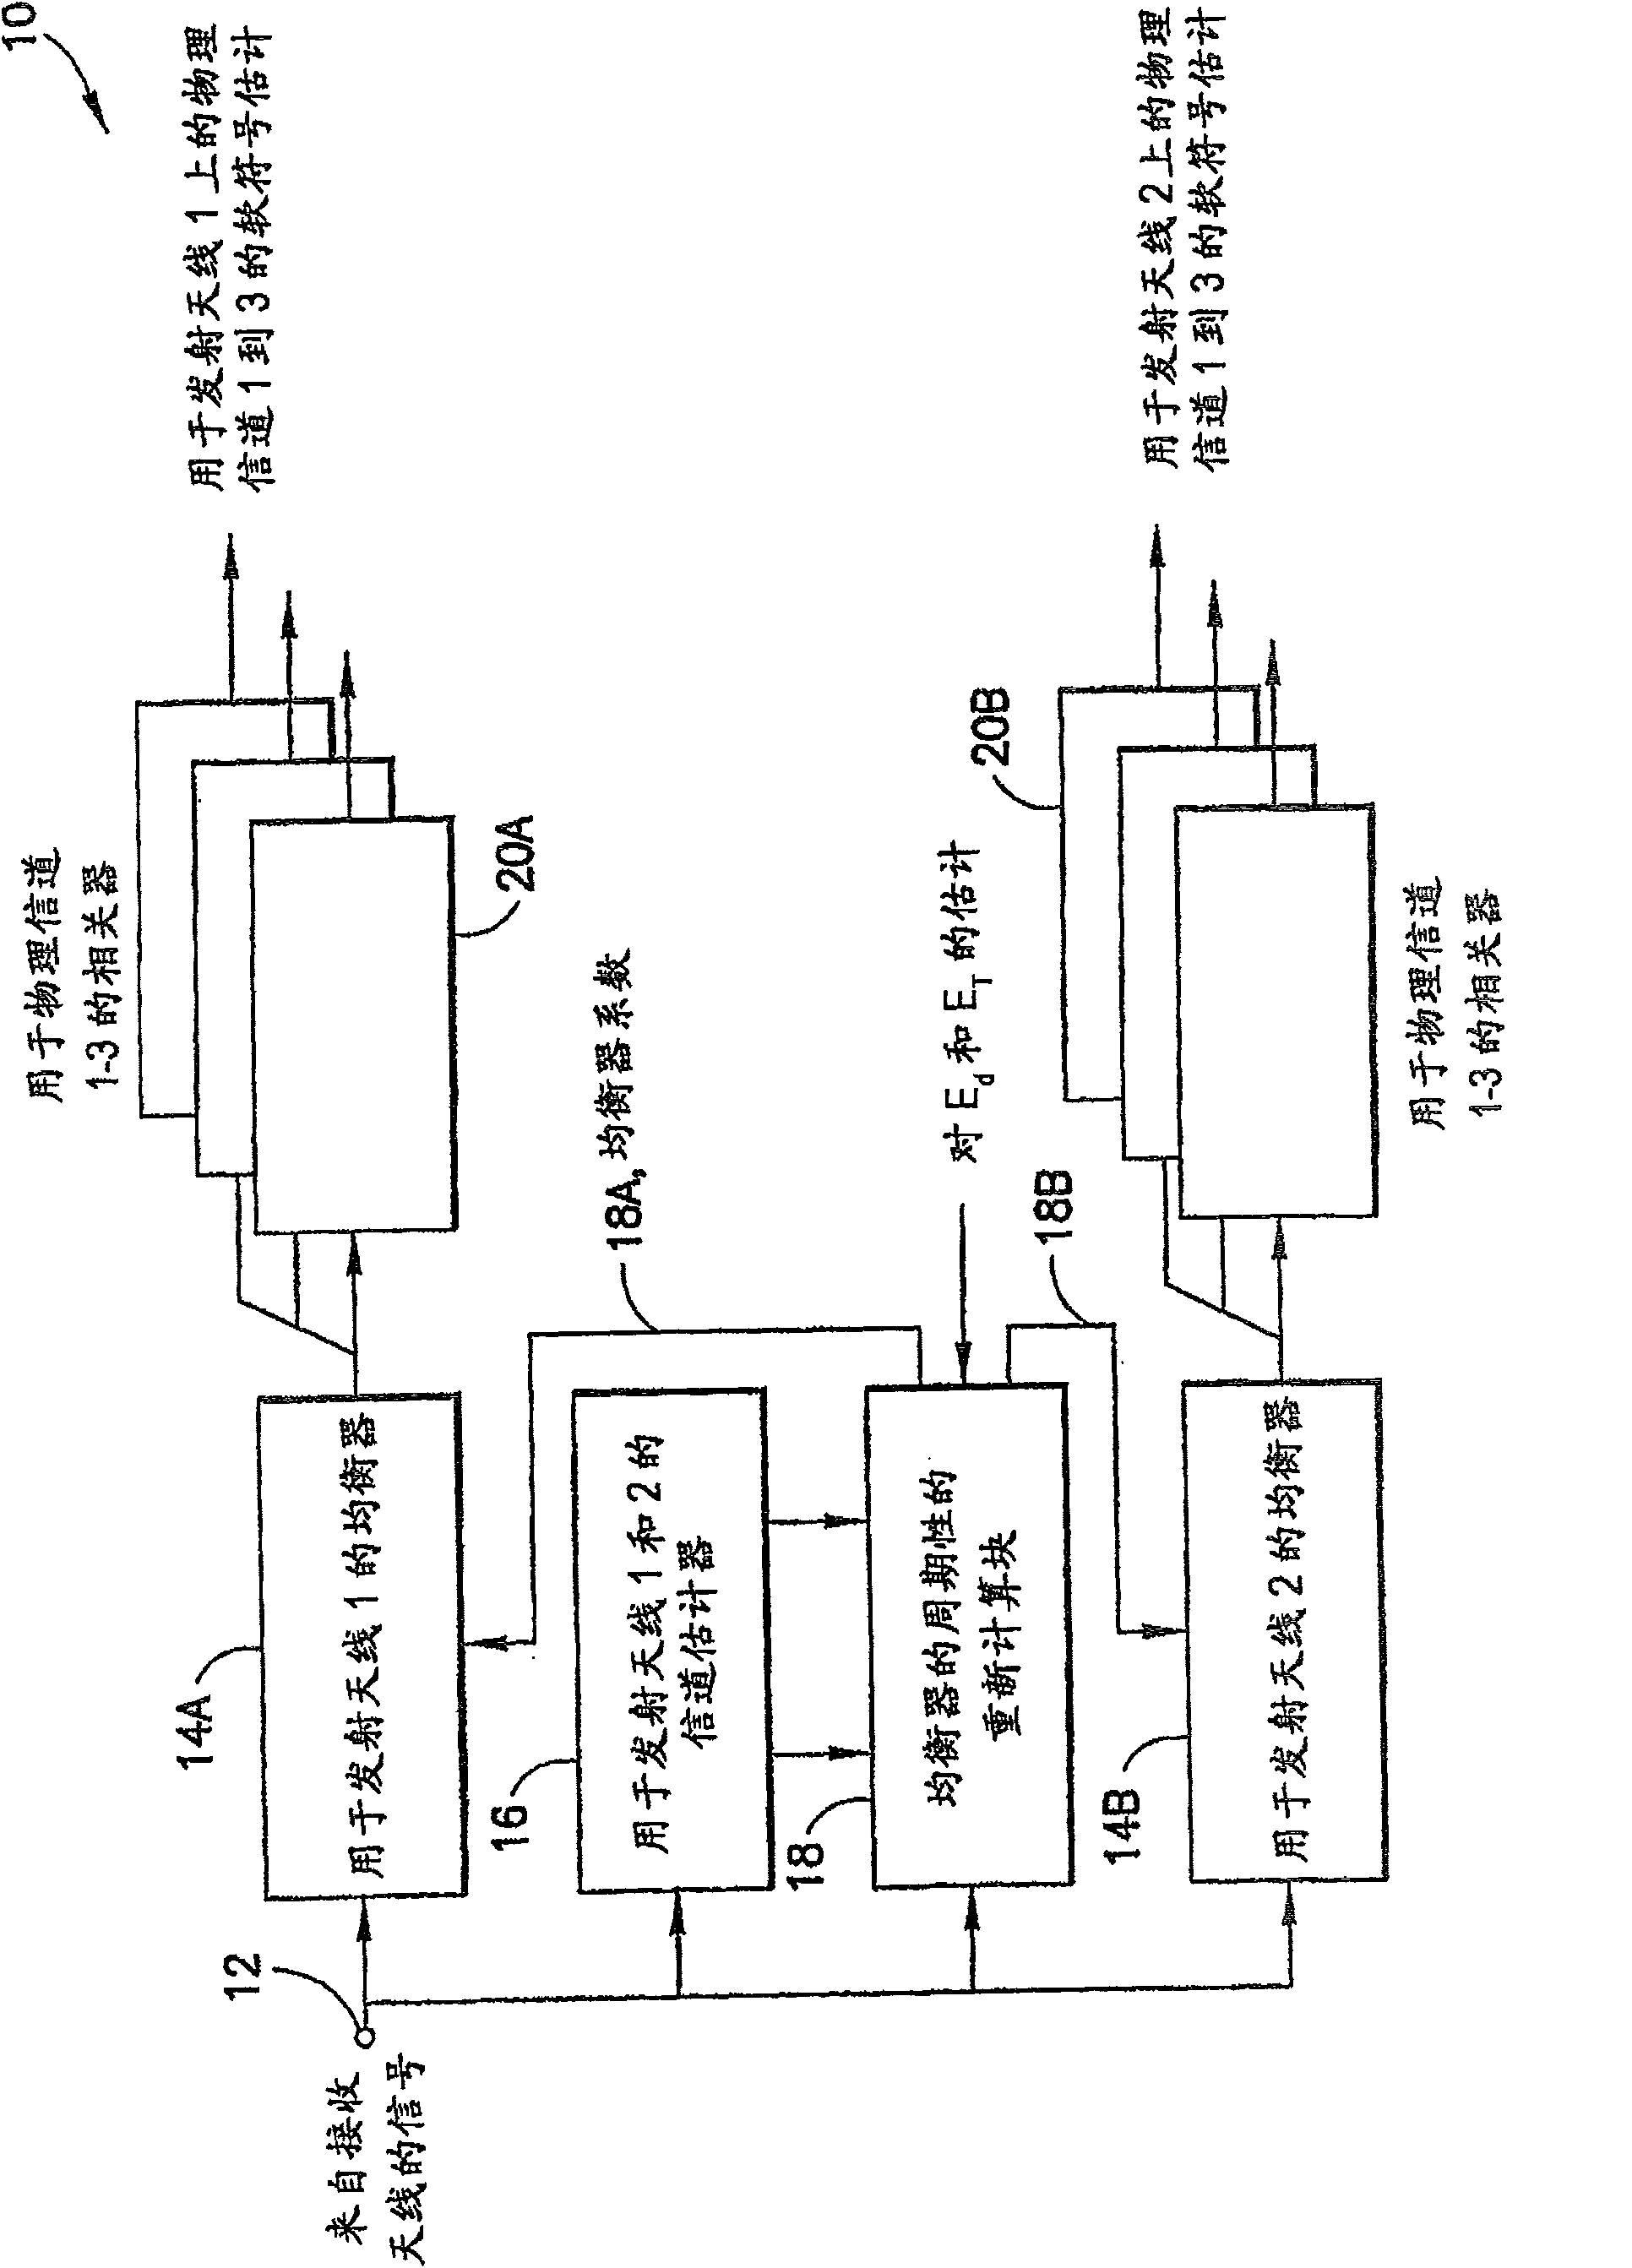 Chip-level or symbol-level equalizer structure for multiple transmit and receiver antenna configurations